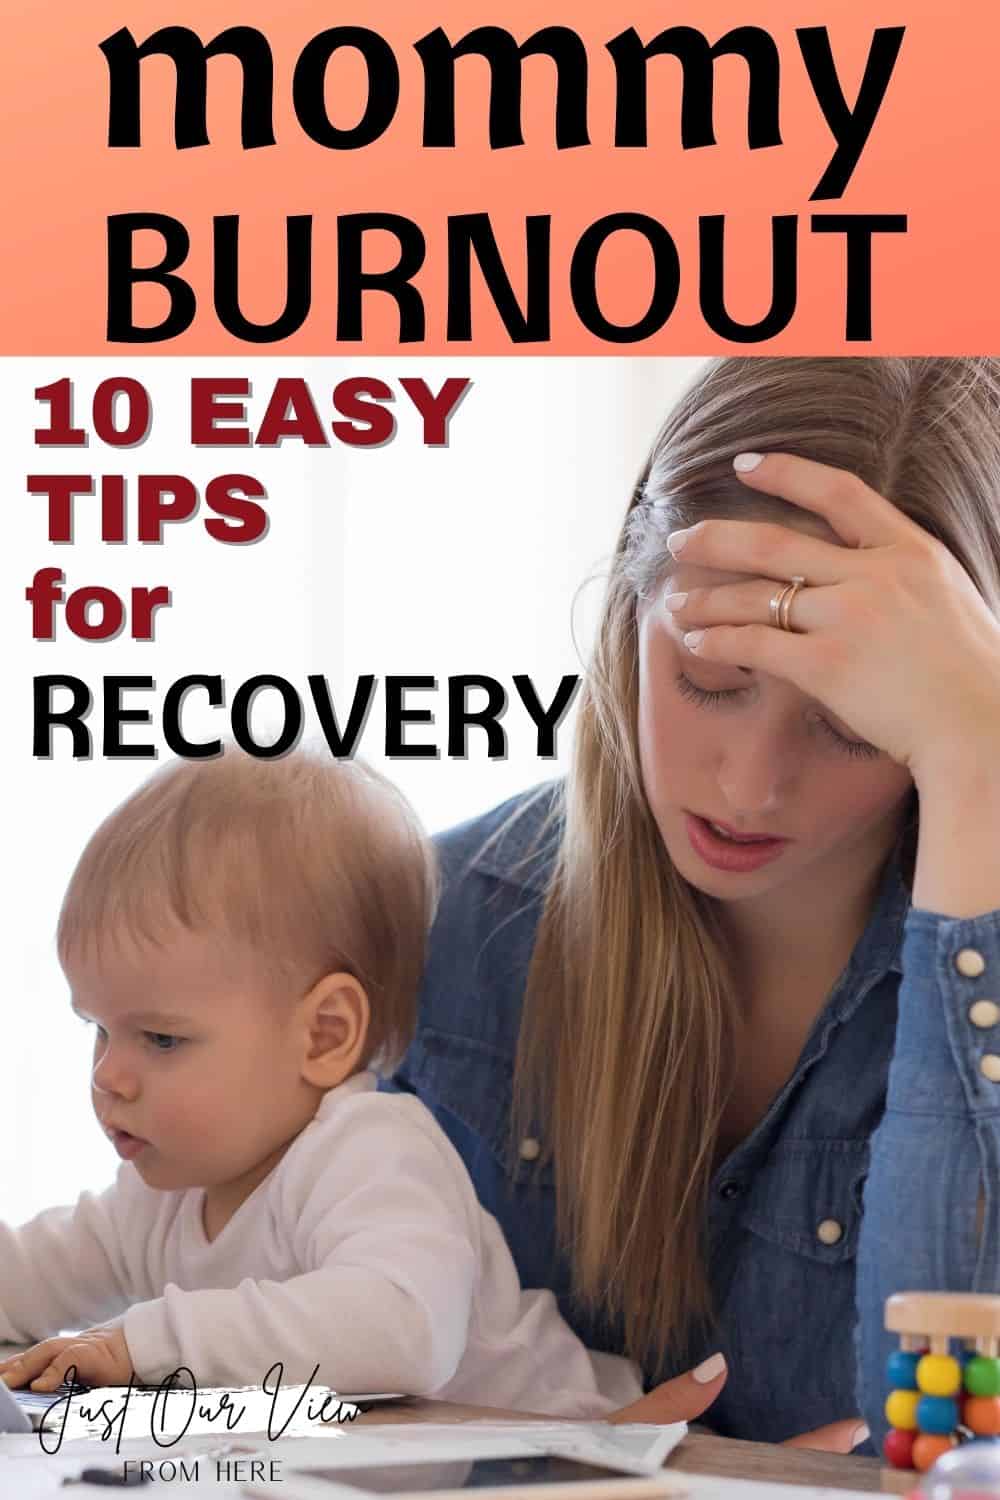 mommy burnout 10 easy tips for recovery